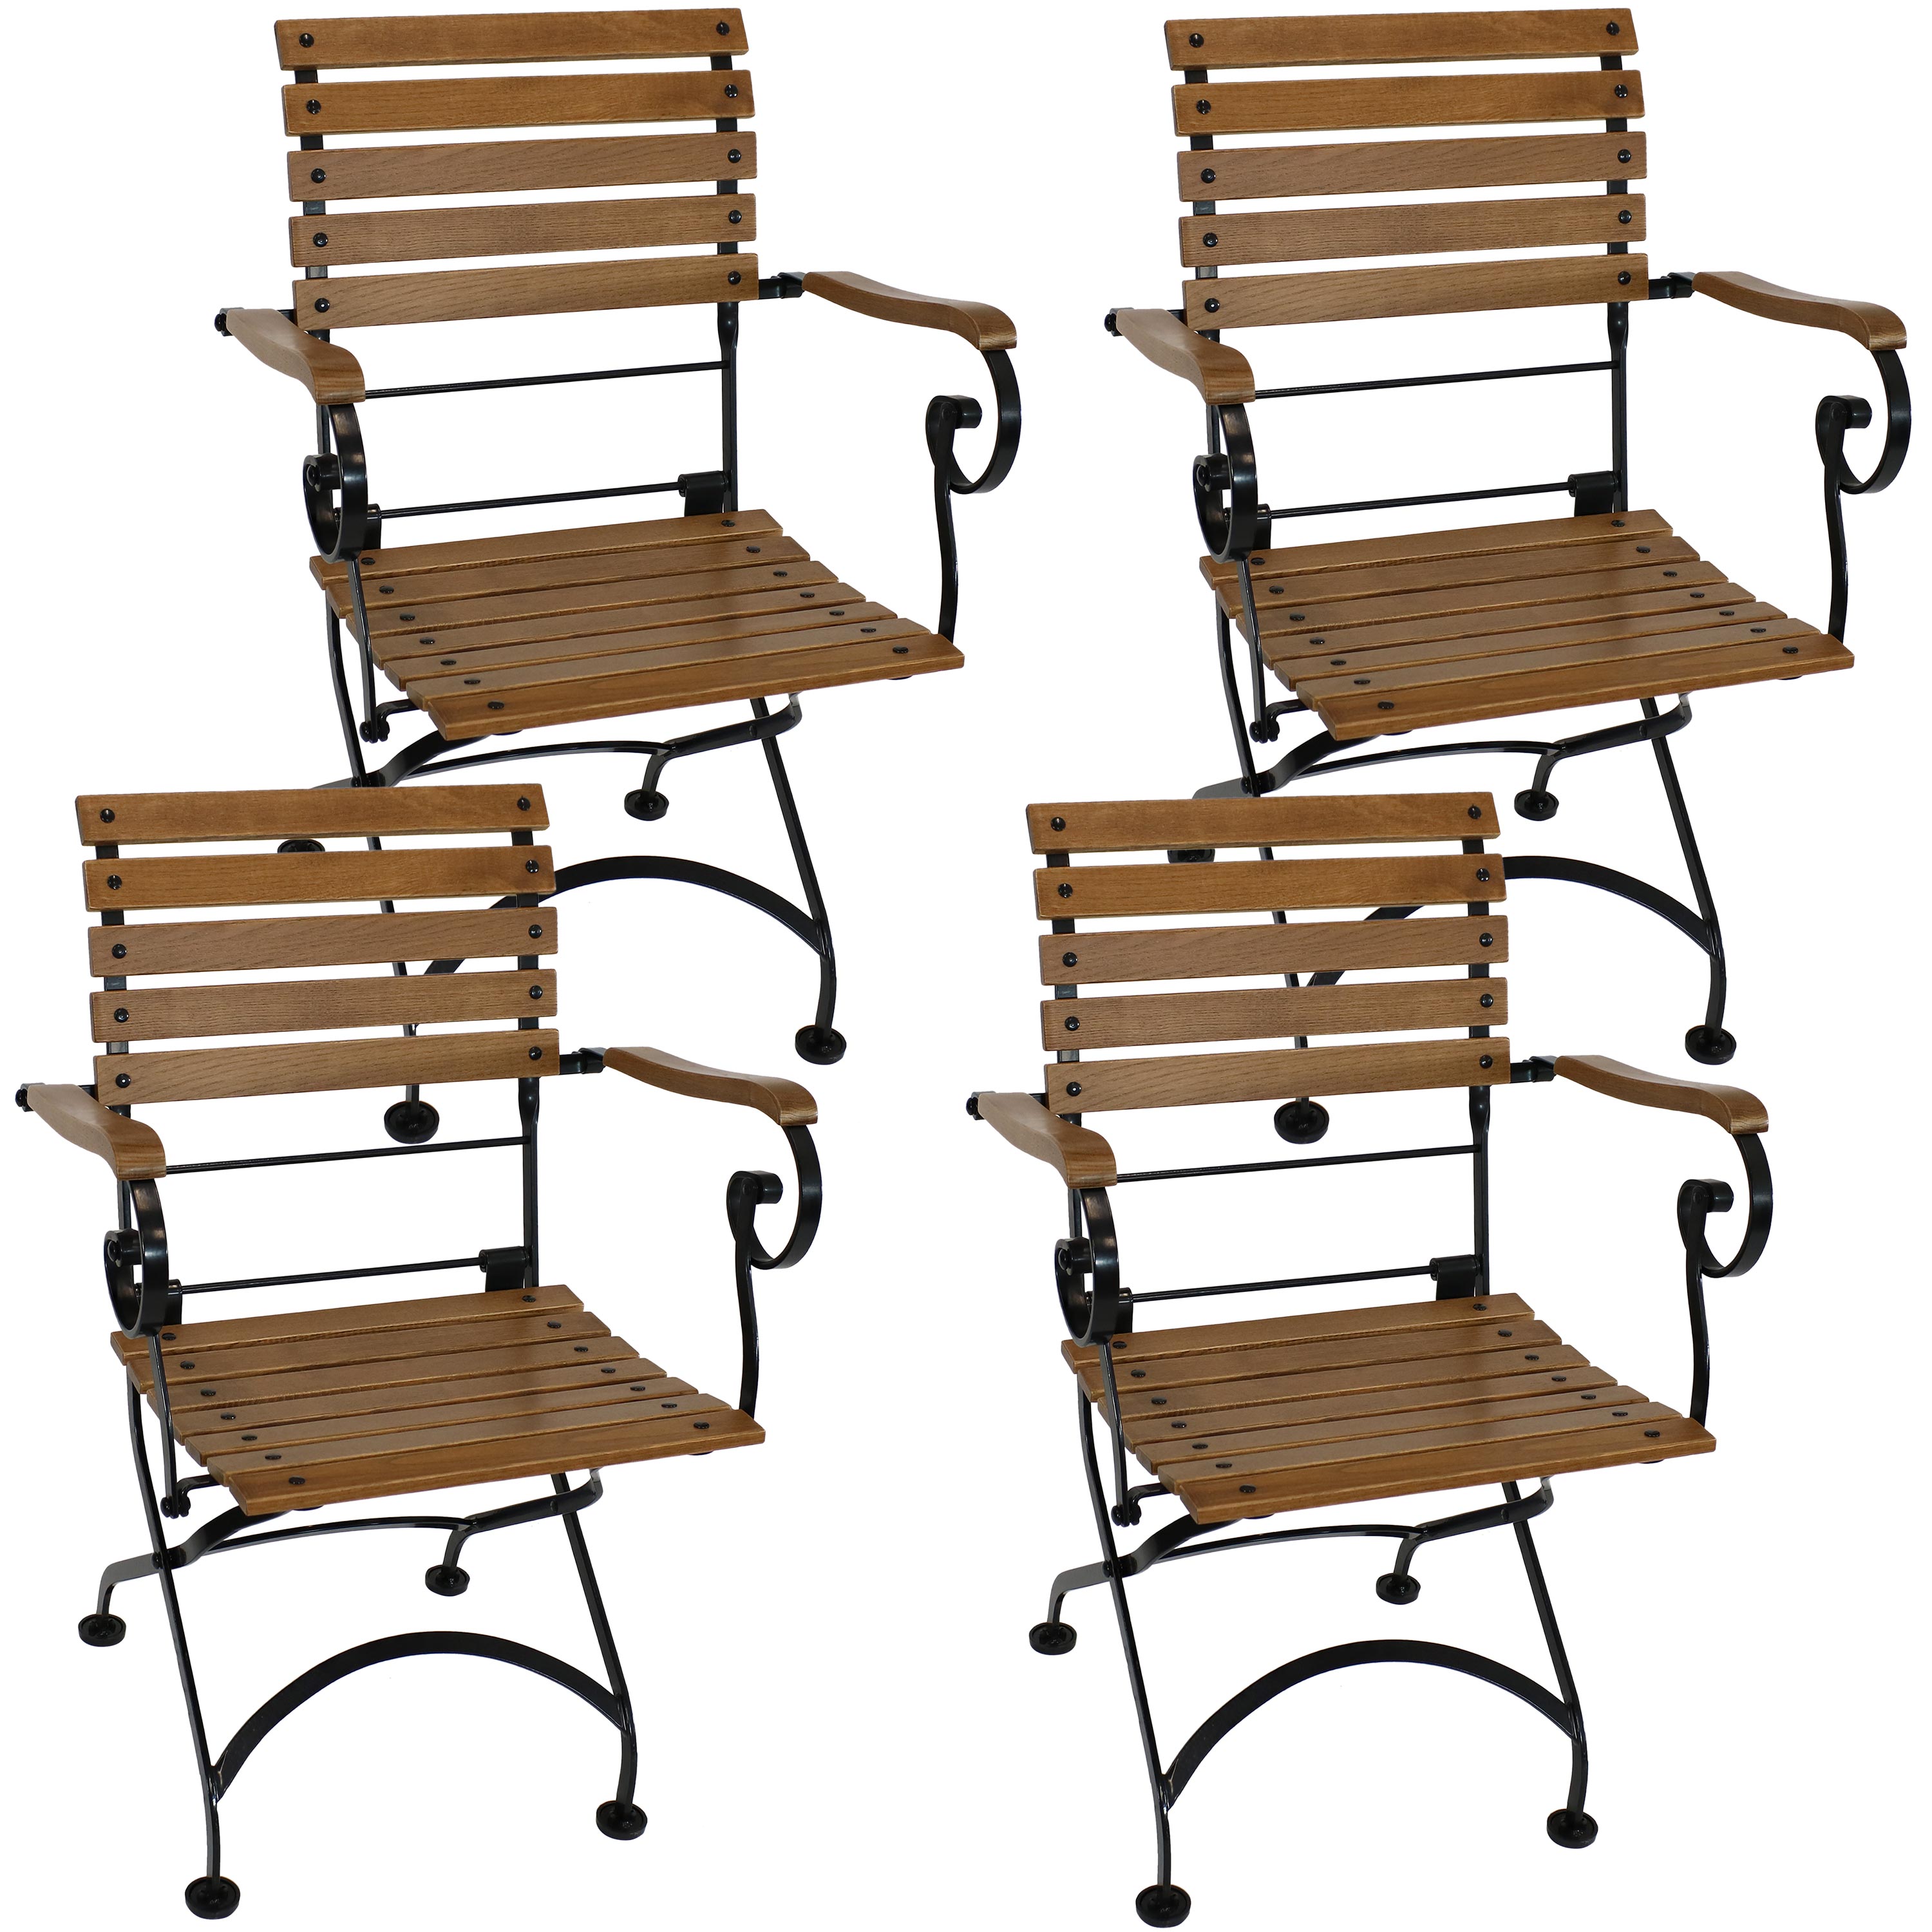 Sunnydaze Deluxe European Chestnut Wood Folding Bistro Chair with Arms - Set of 4